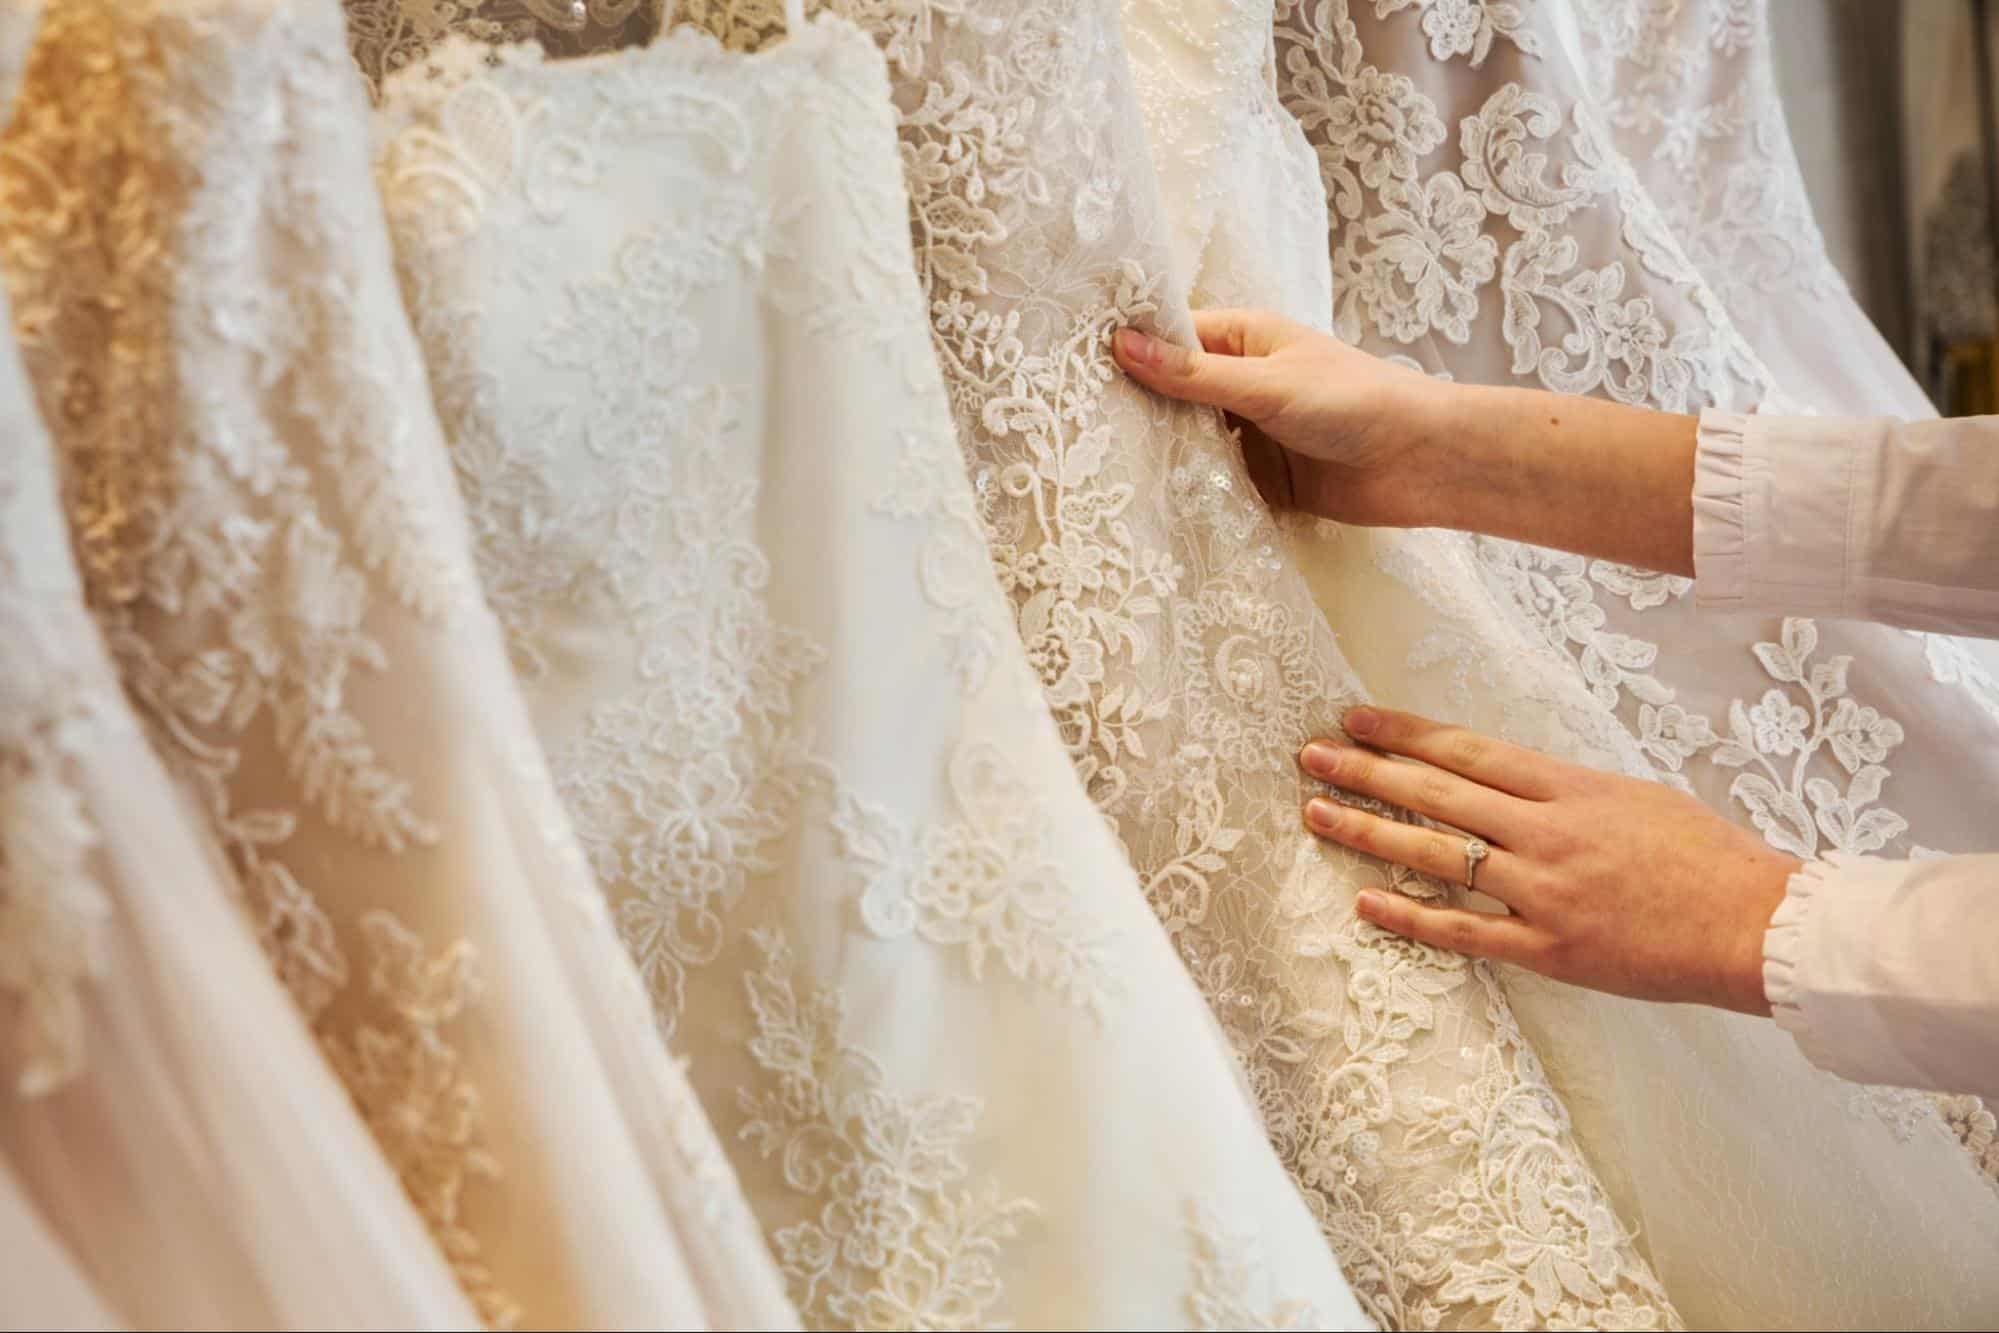 How To Choose A Timeless Wedding Dress Marinaj Banquets And Events 9587